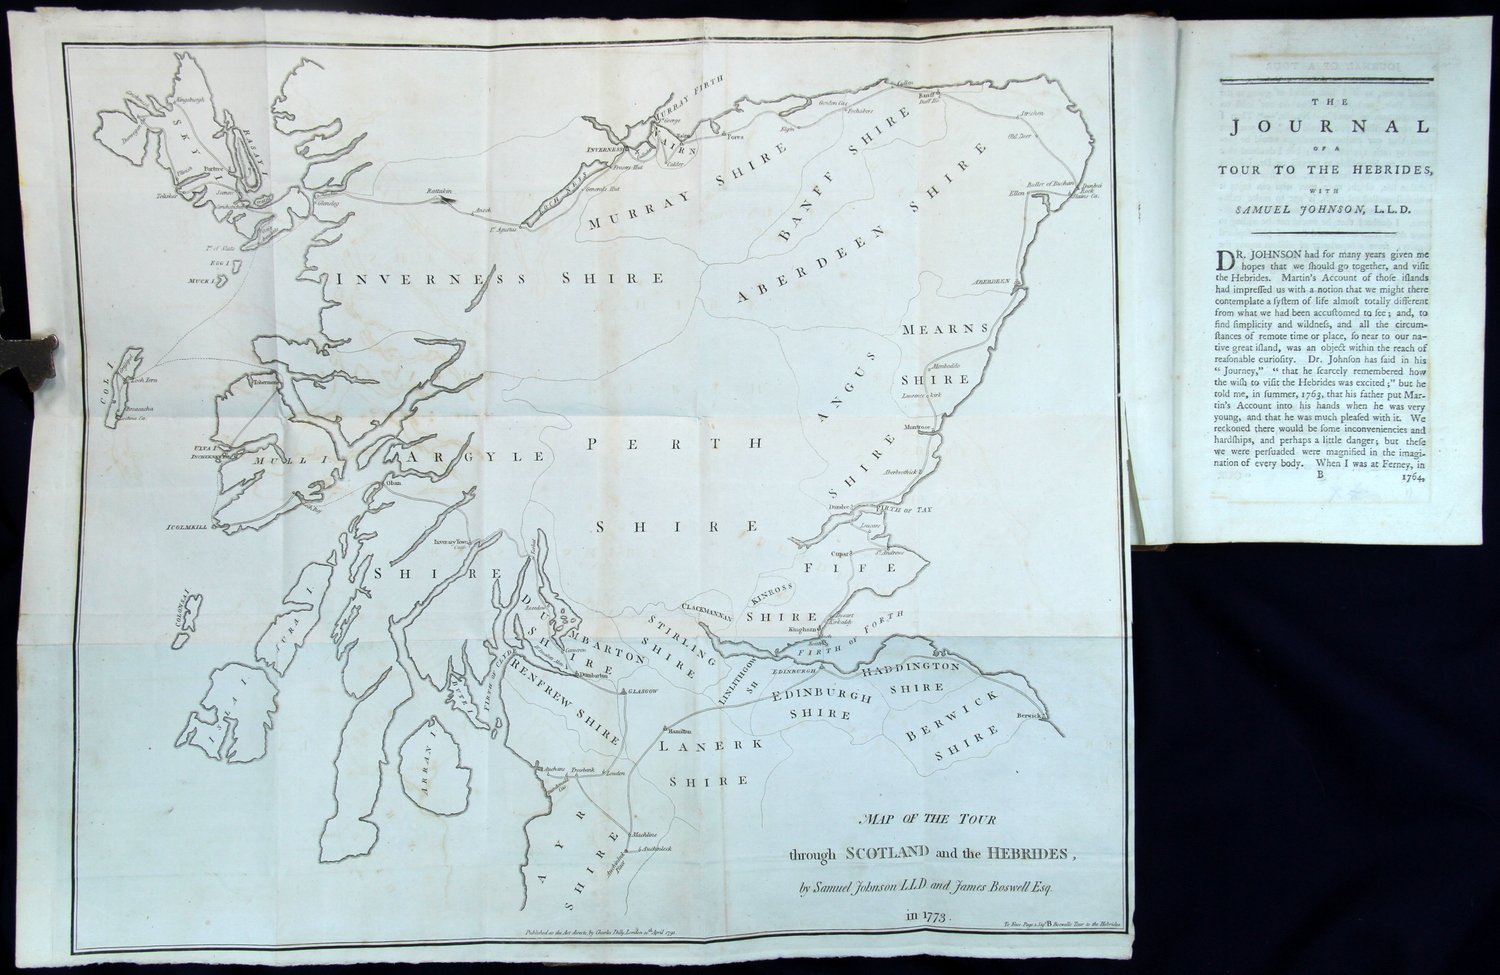 journal of a tour to the hebrides